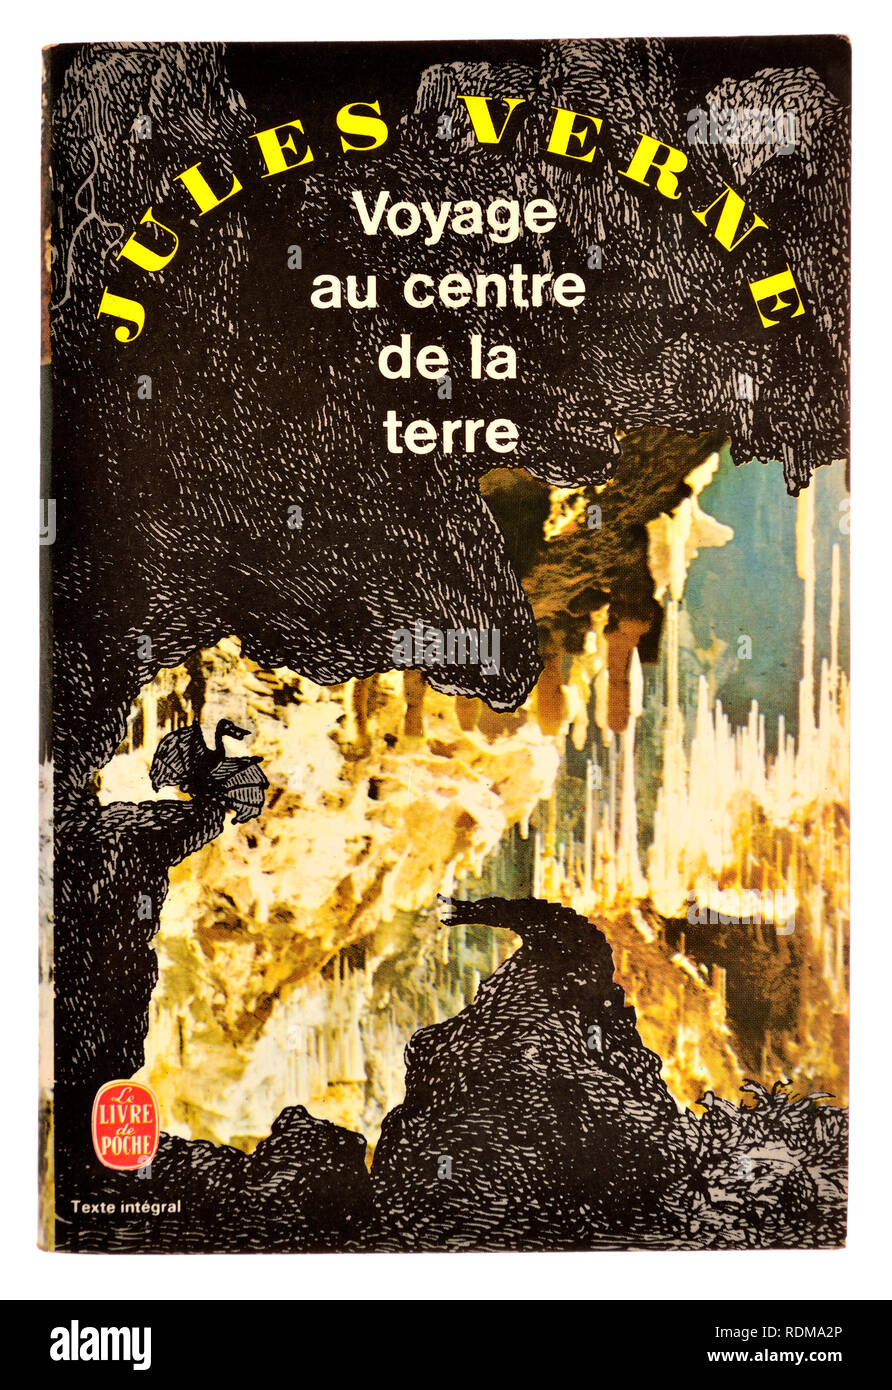 Voyage au Centre de la Terre (Jules Verne: 1864) Journey to the Centre of the Earth, French edition Stock Photo